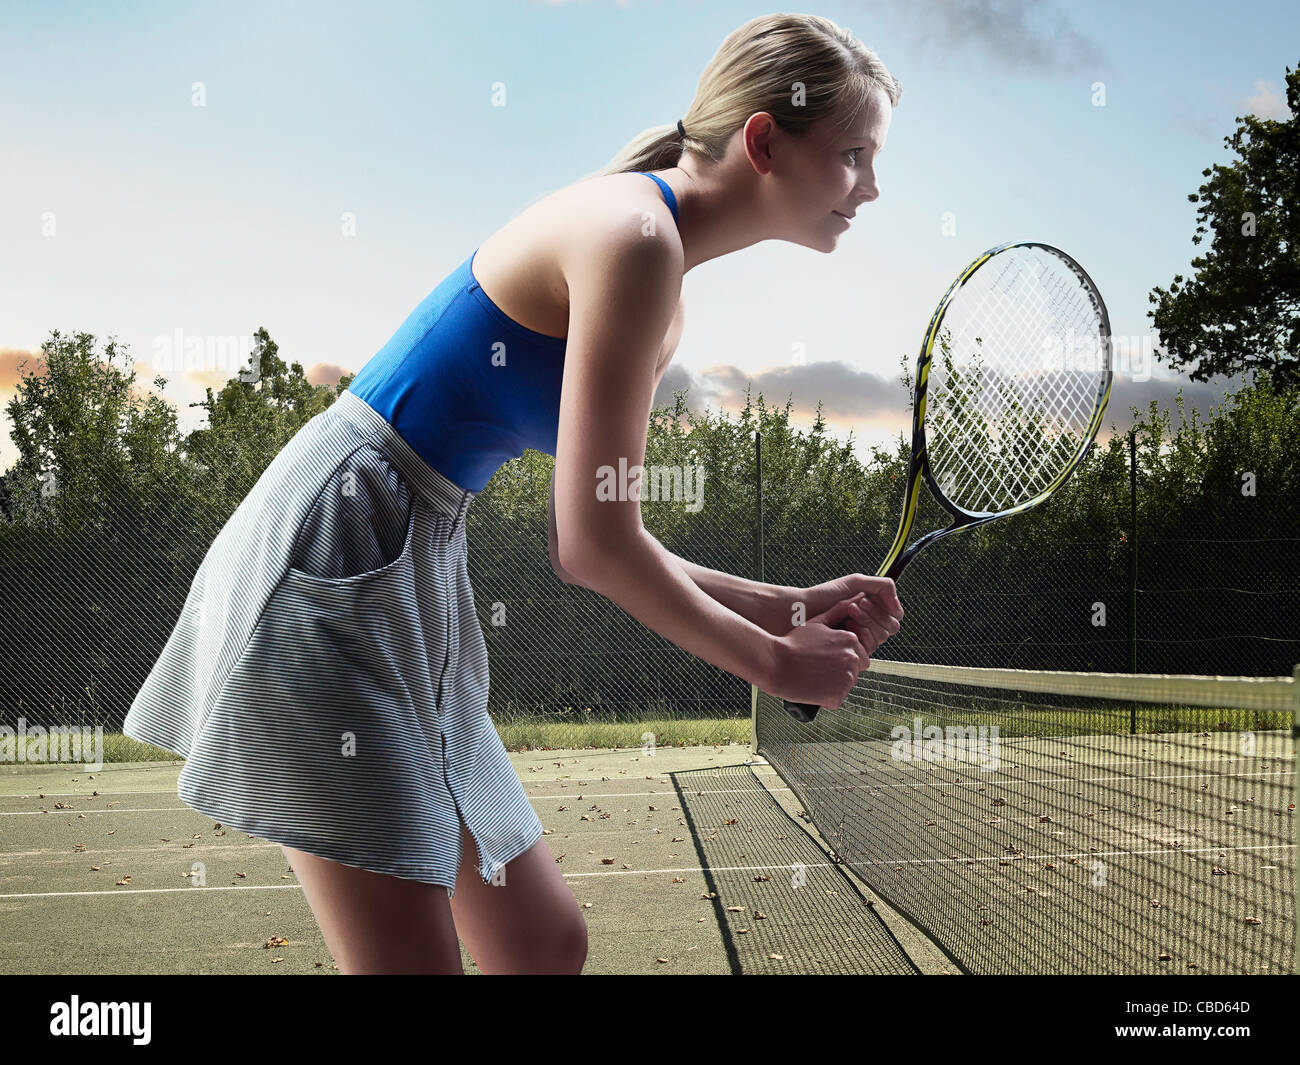 Woman playing tennis on court Stock Photo